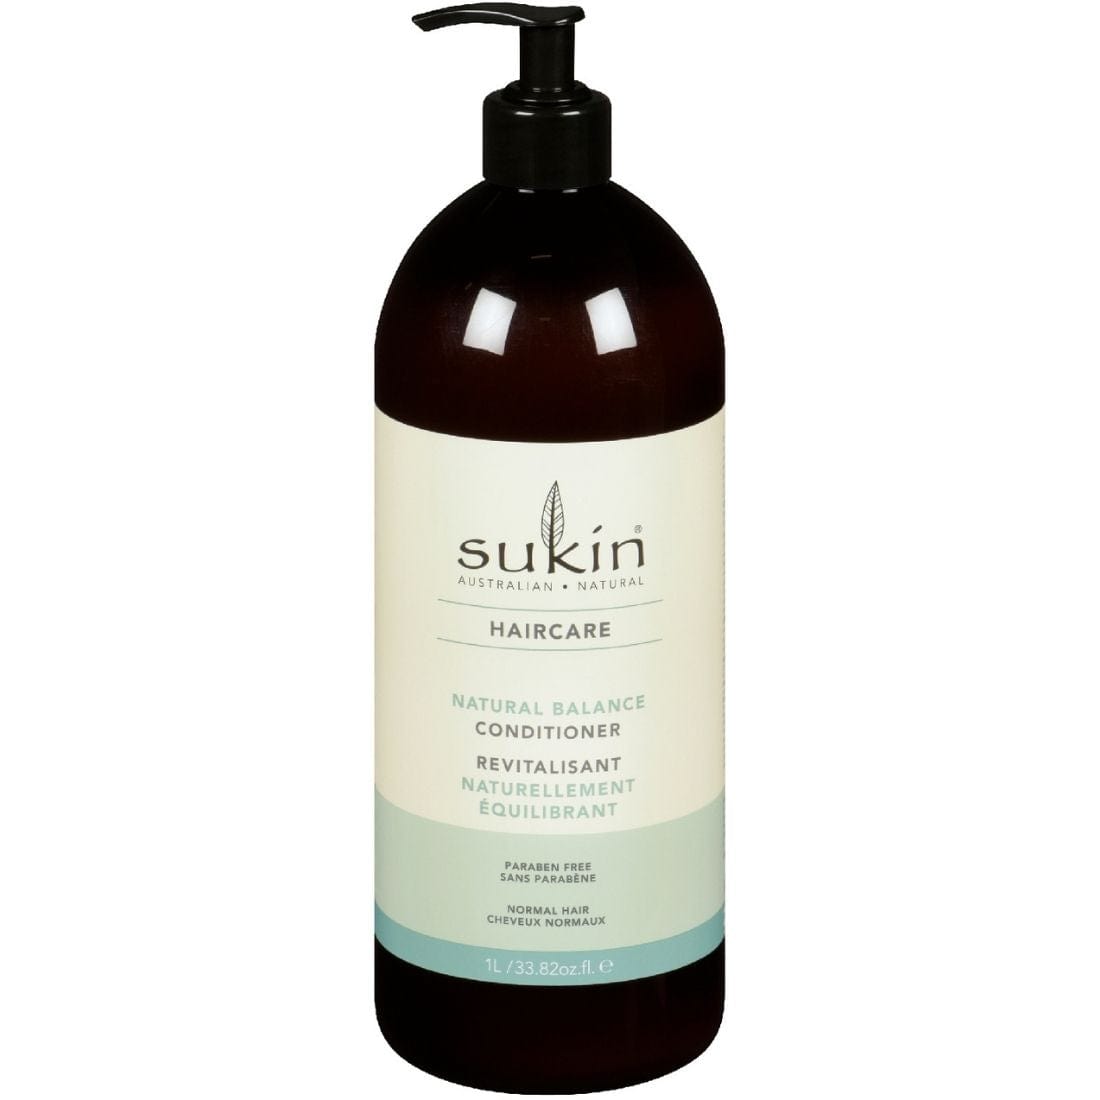 Sukin Natural Balance Conditioner, Clearance 40% Off, Final Sale